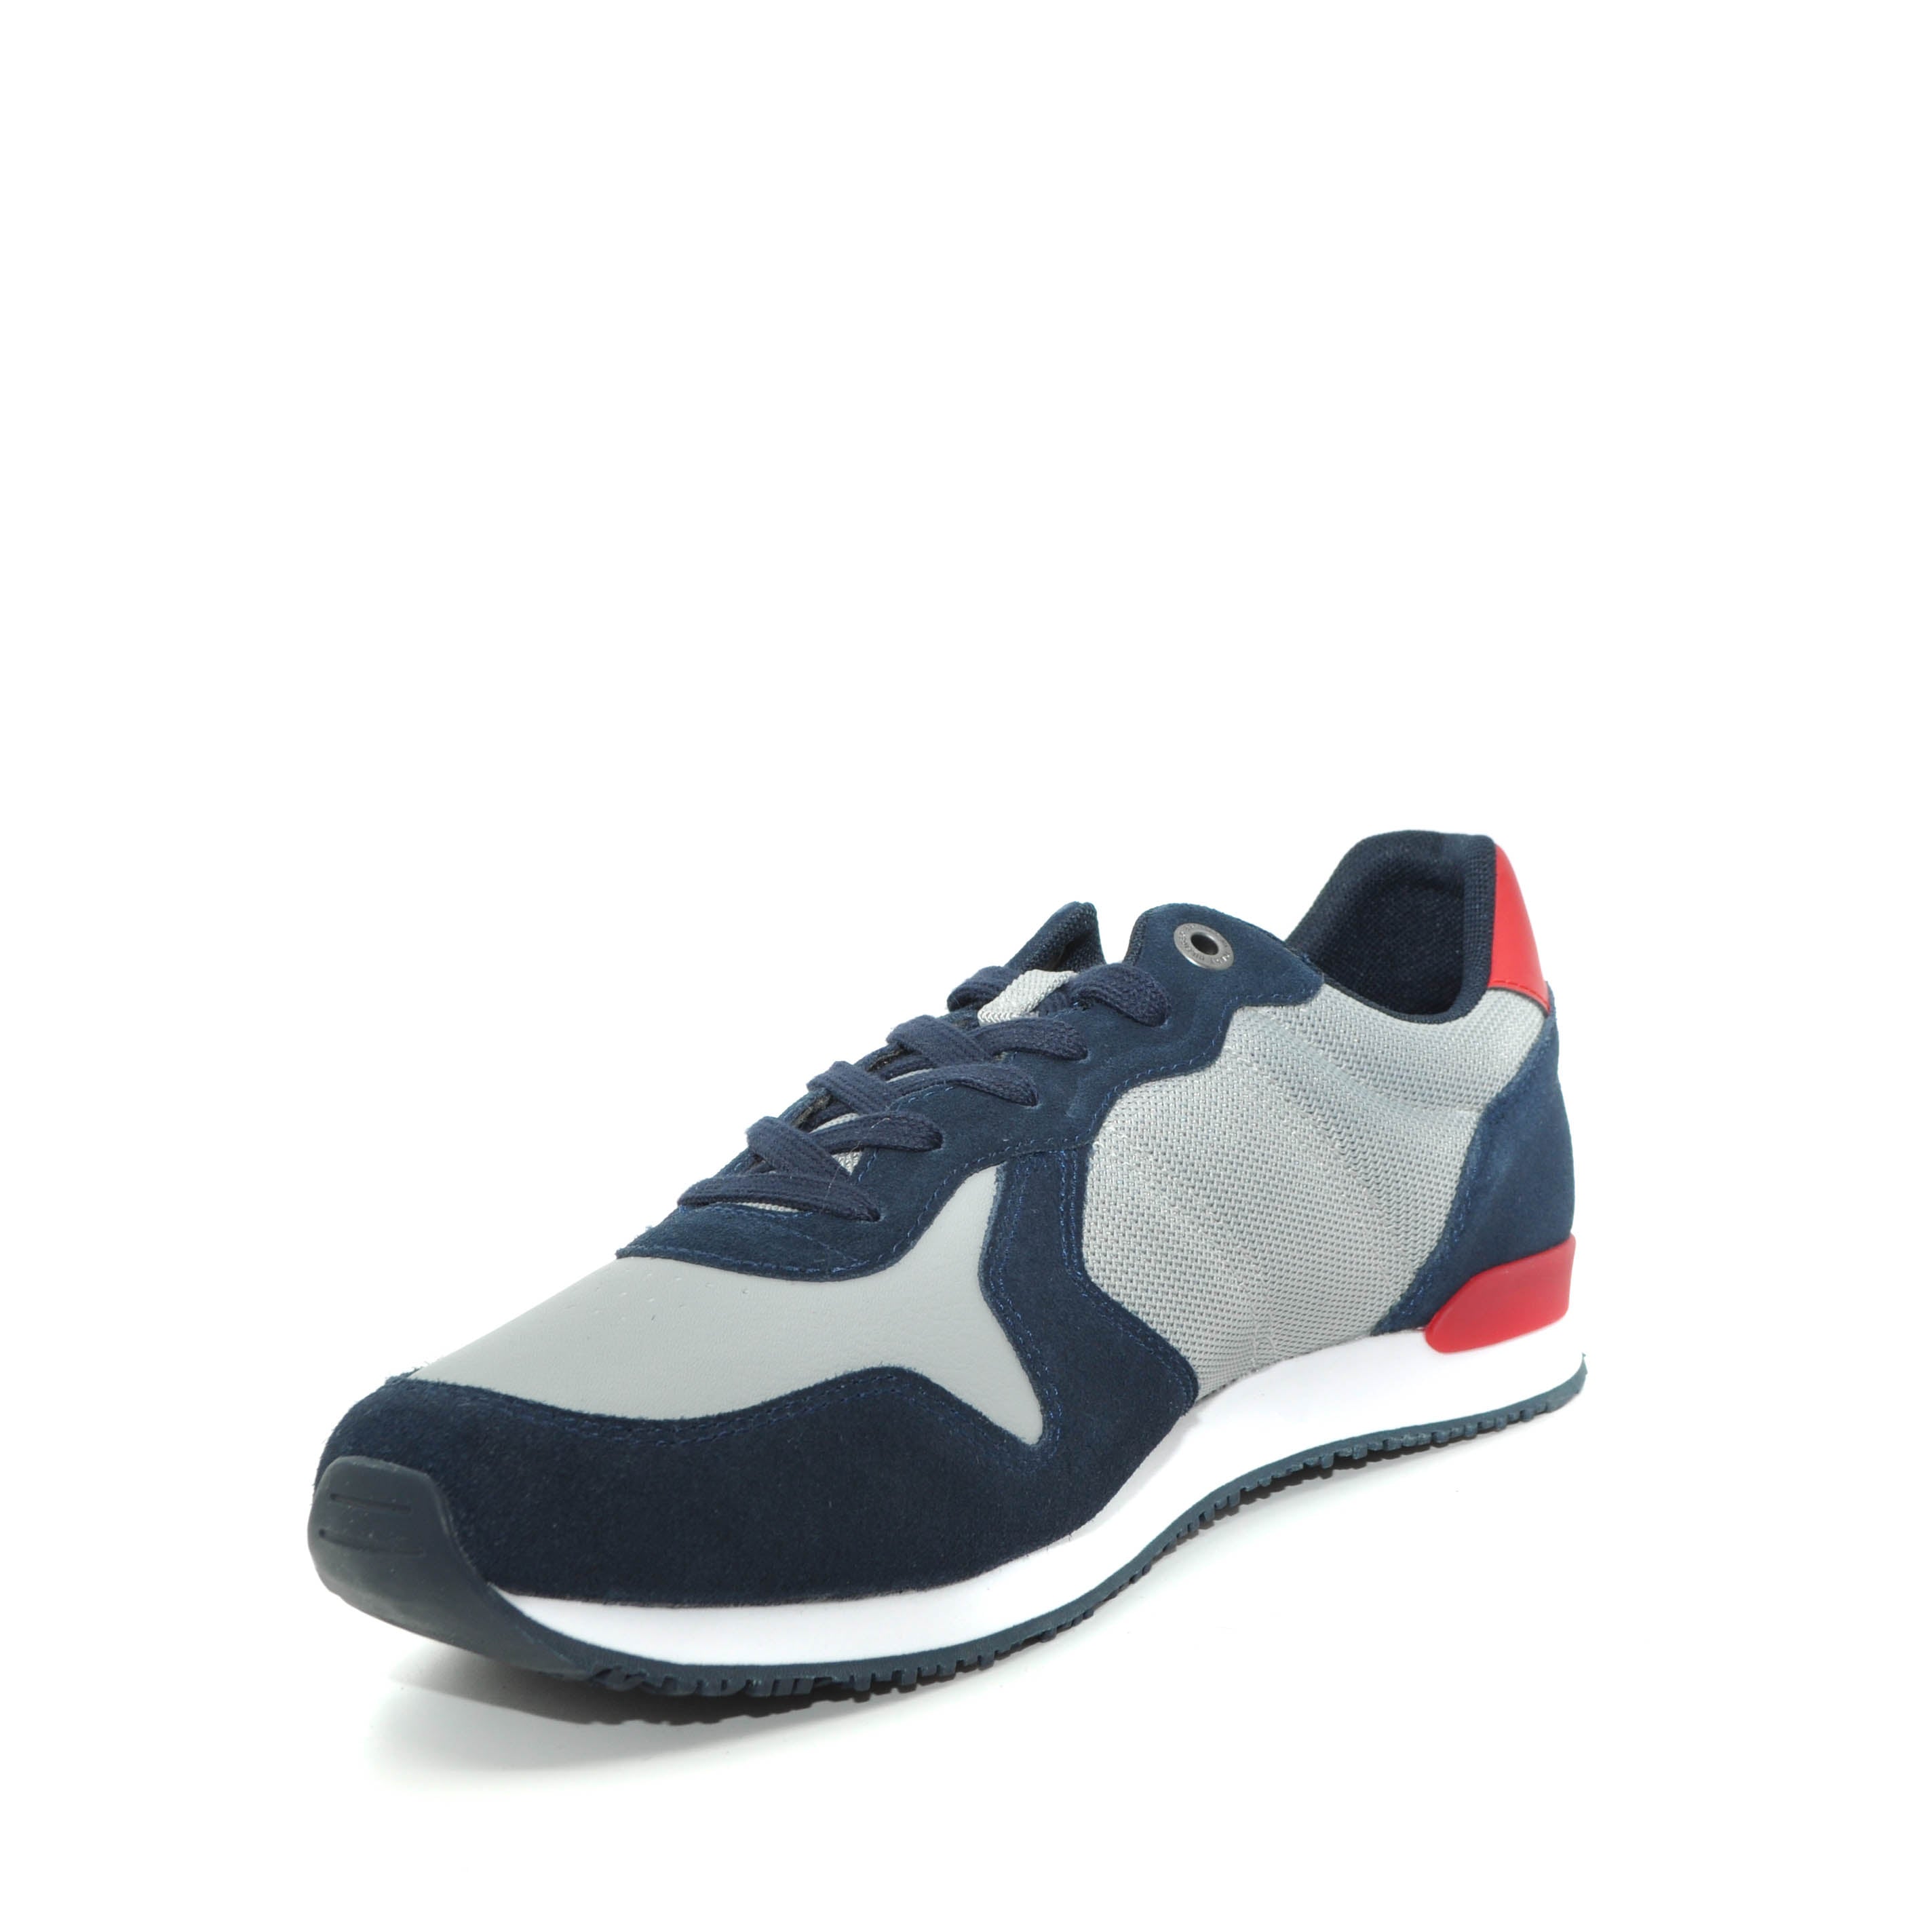 Tommy mens shoes online ireland | mens casual